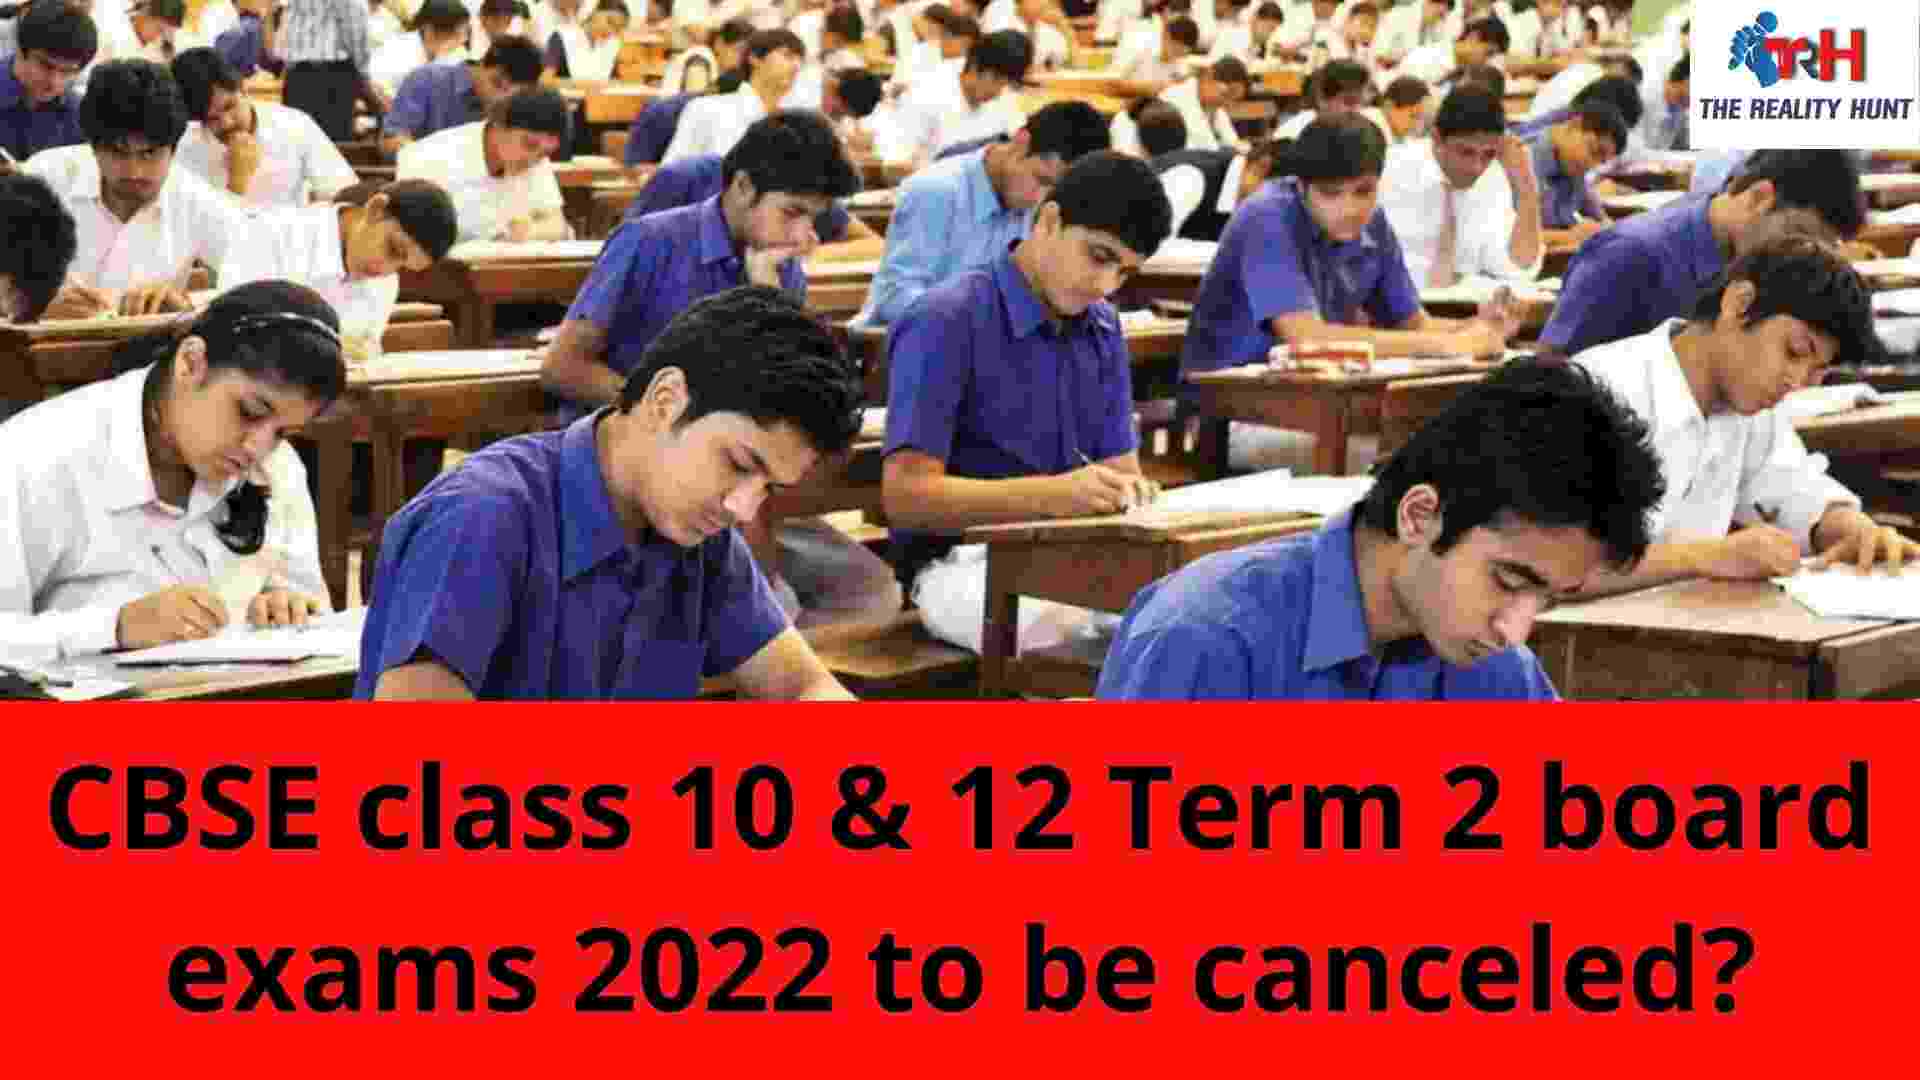 CBSE class 10 & 12 Term 2 board exams 2022 to be canceled? BIG announcement by exam controller